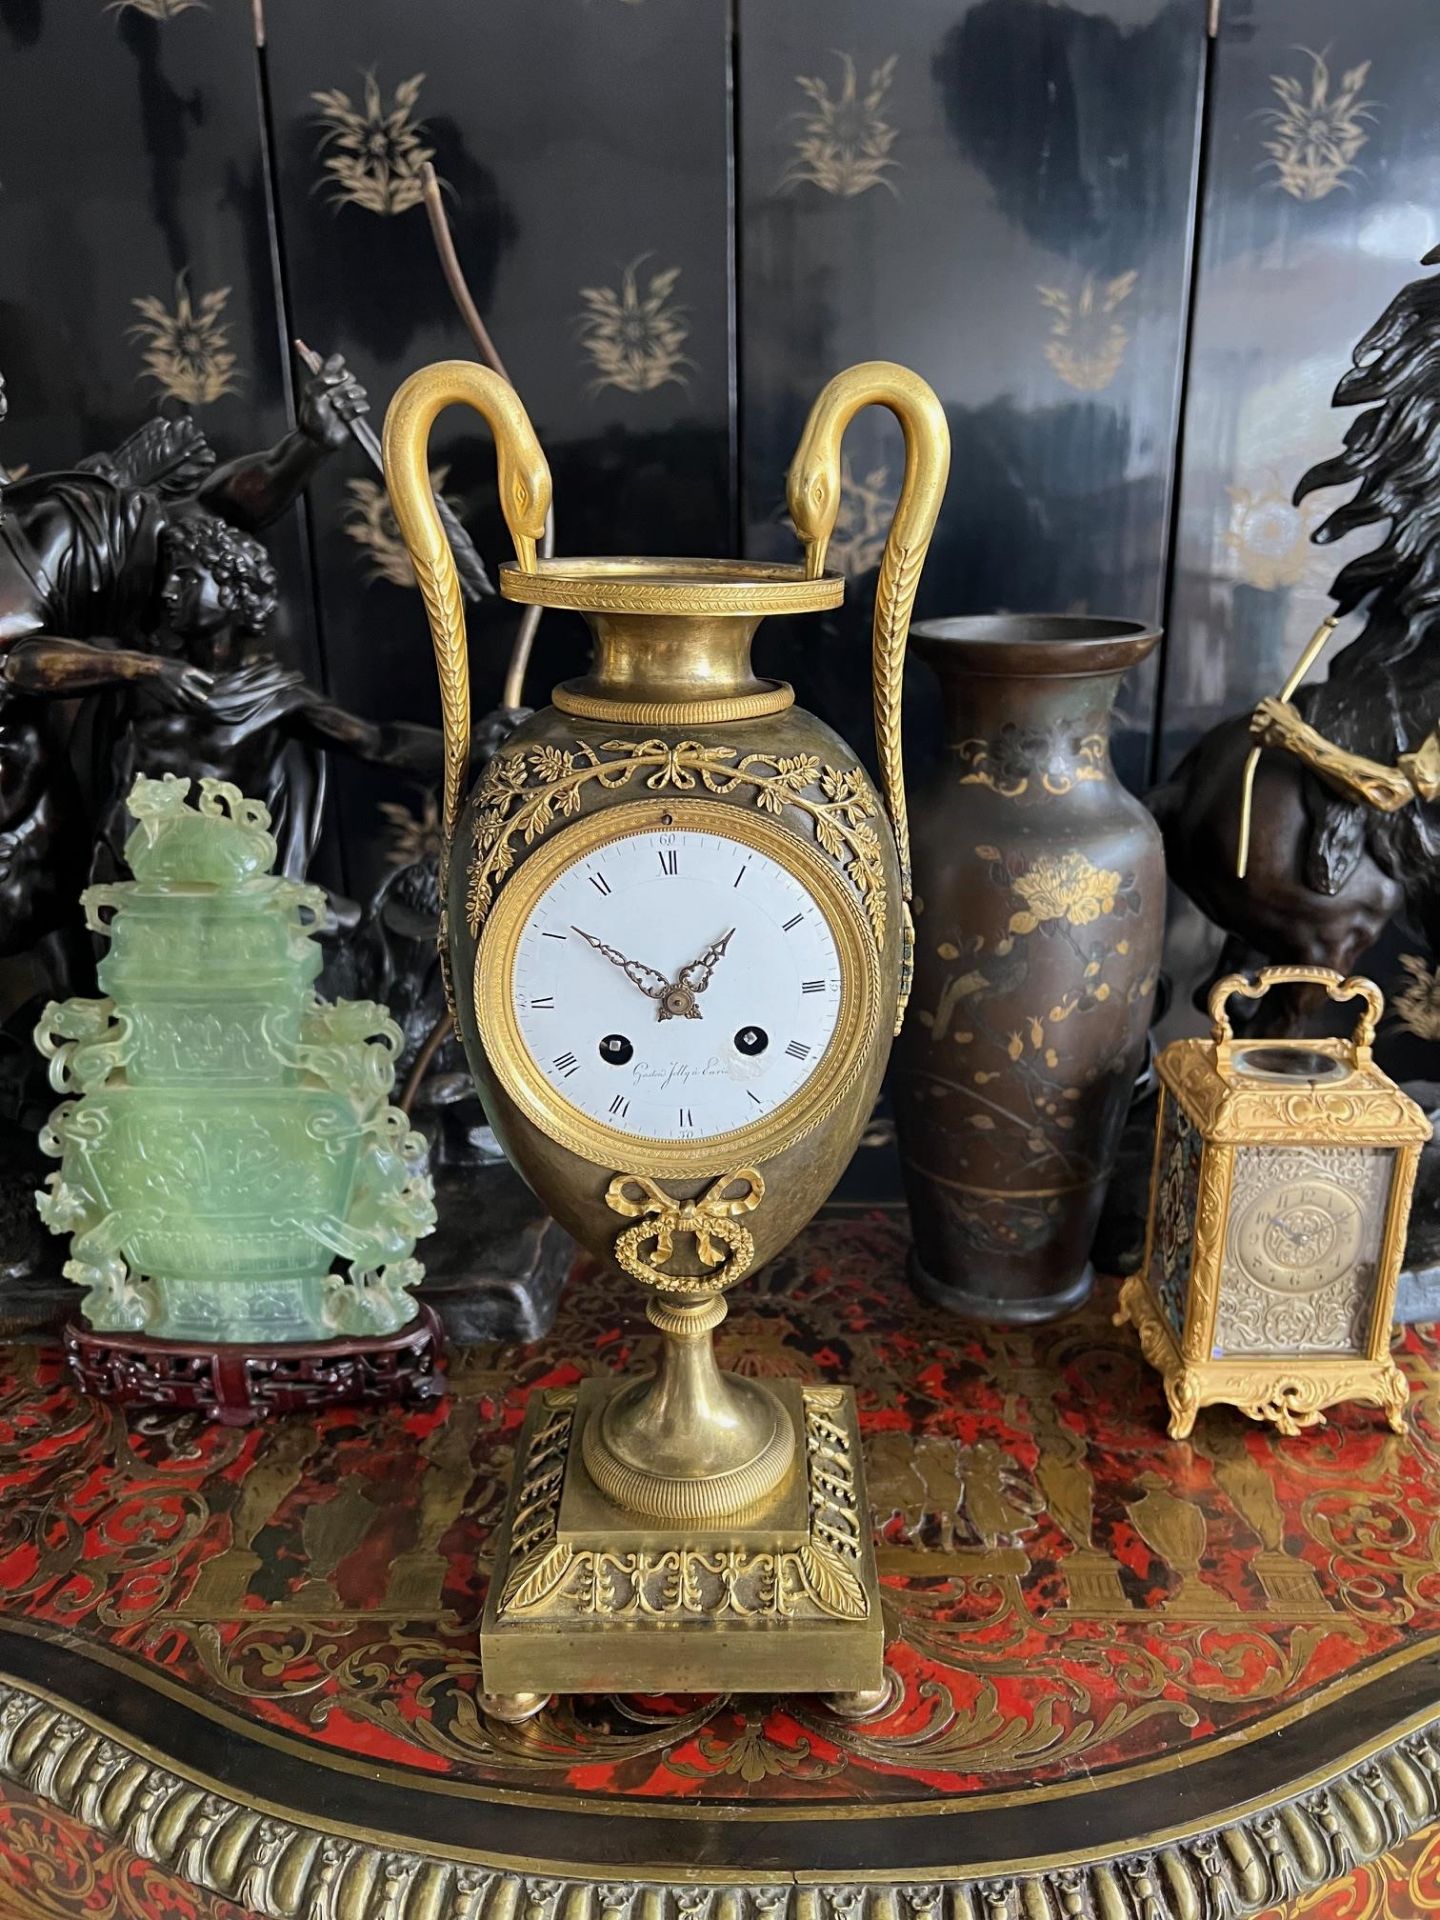 AN EARLY 19TH CENTURY EMPIRE PERIOD PATINATED AND GILT BRONZE MANTEL CLOCK - Image 3 of 7